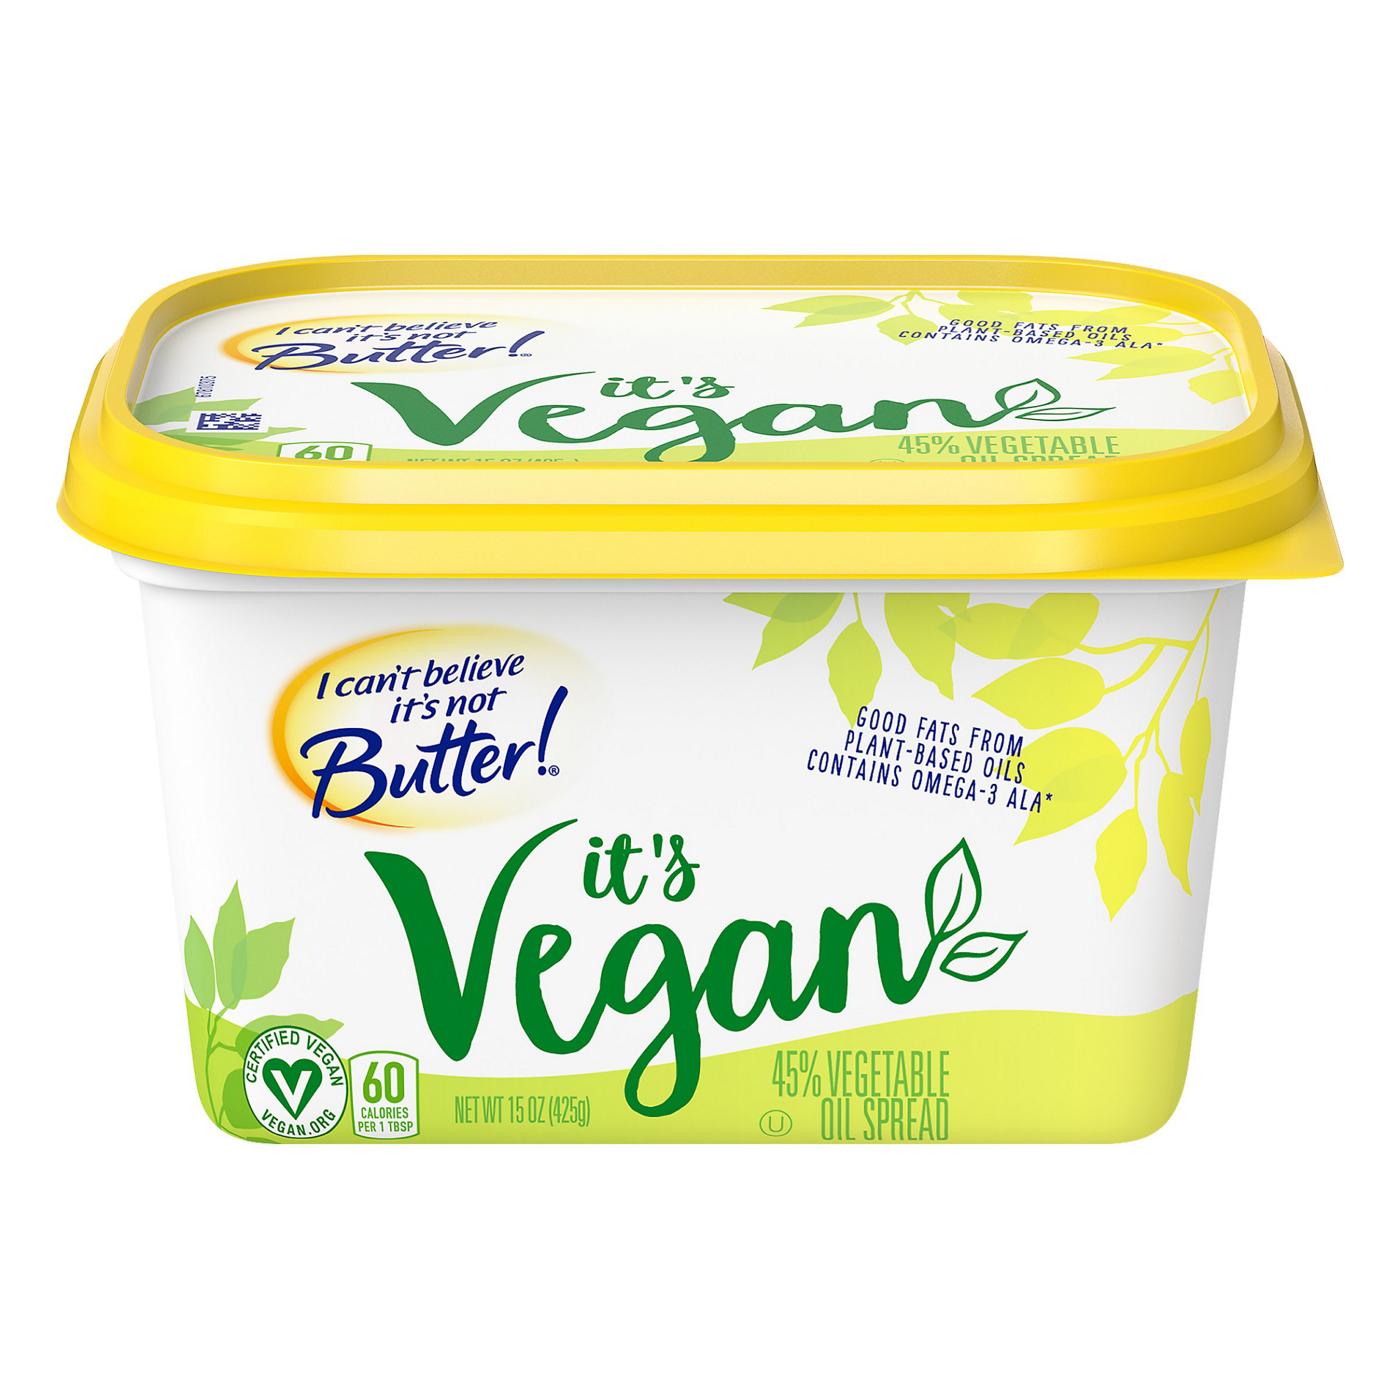 I Can't Believe It's Not Butter! Vegan Spread; image 2 of 9